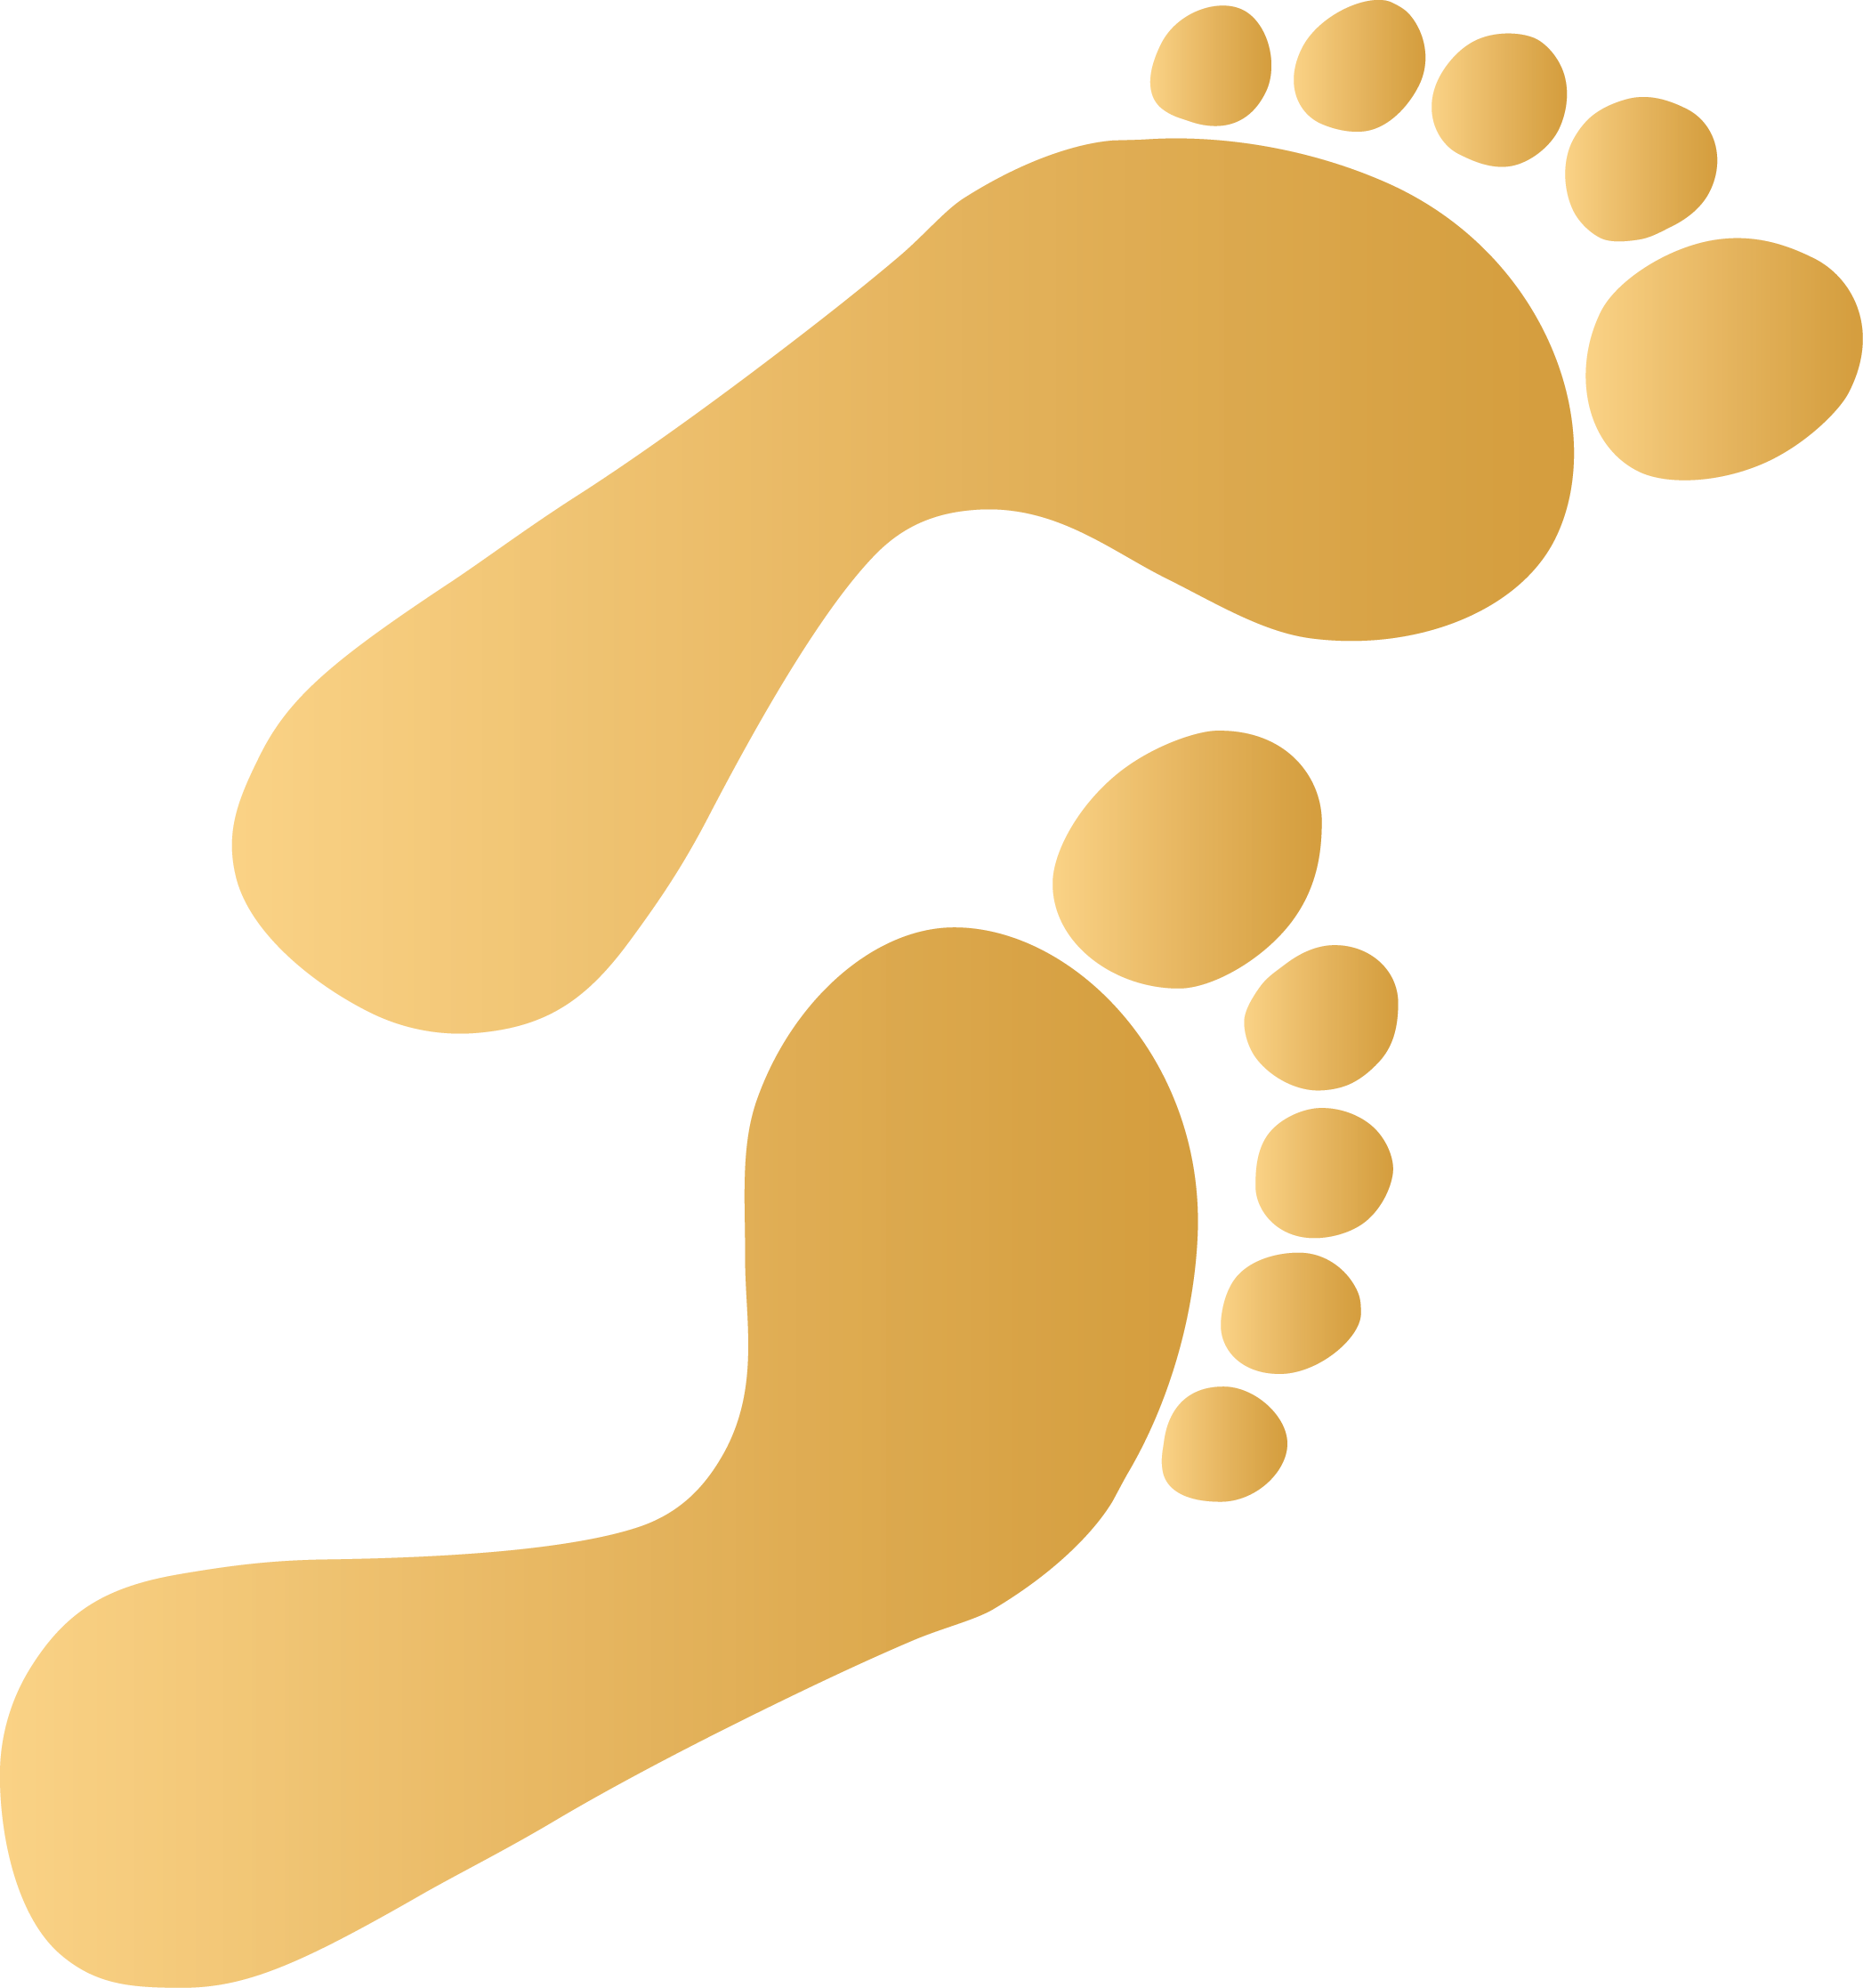 Footprint clipart journey. Footprints in the sand